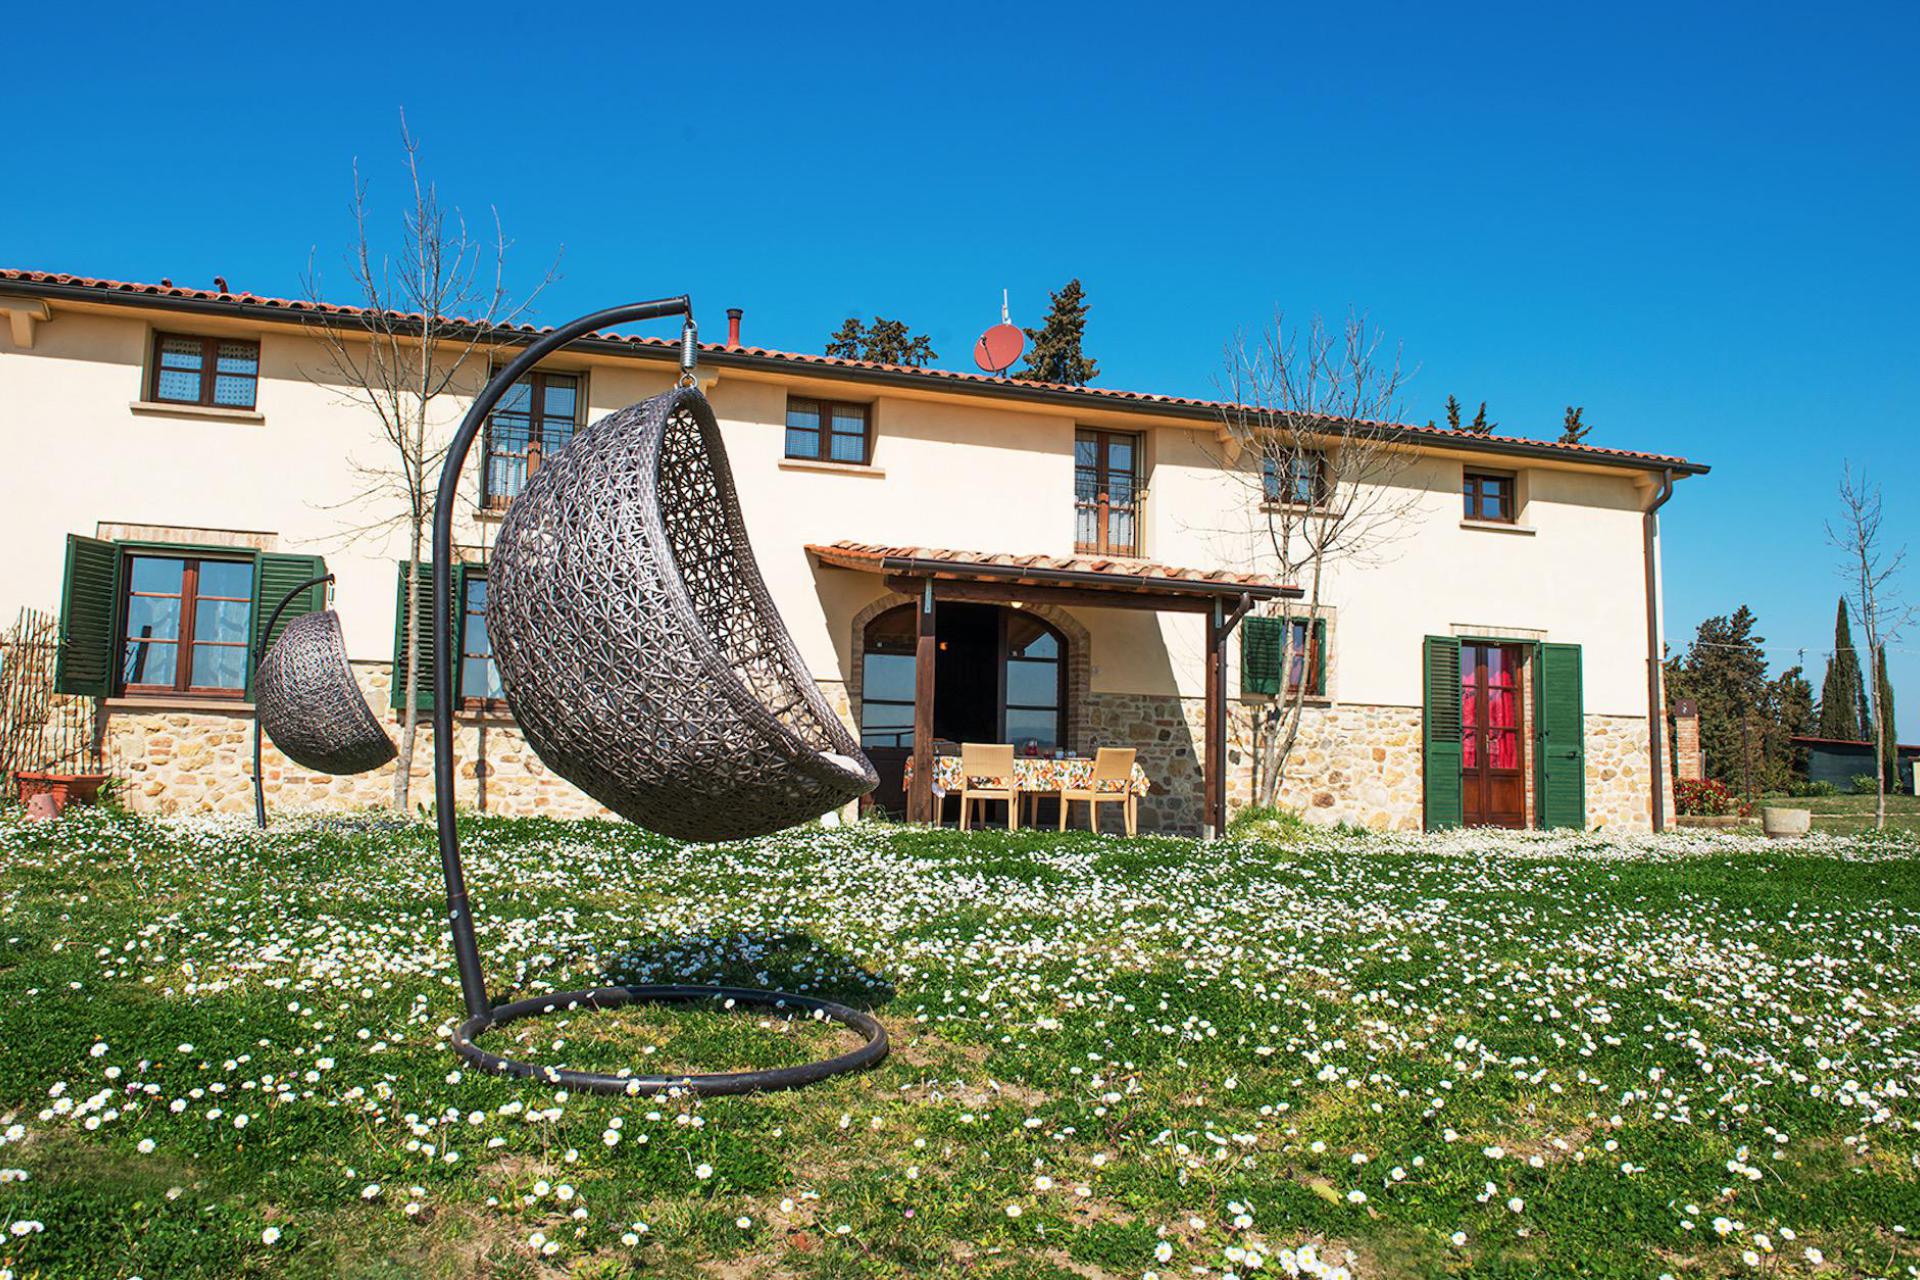 3. Convivial family agriturismo in Tuscany